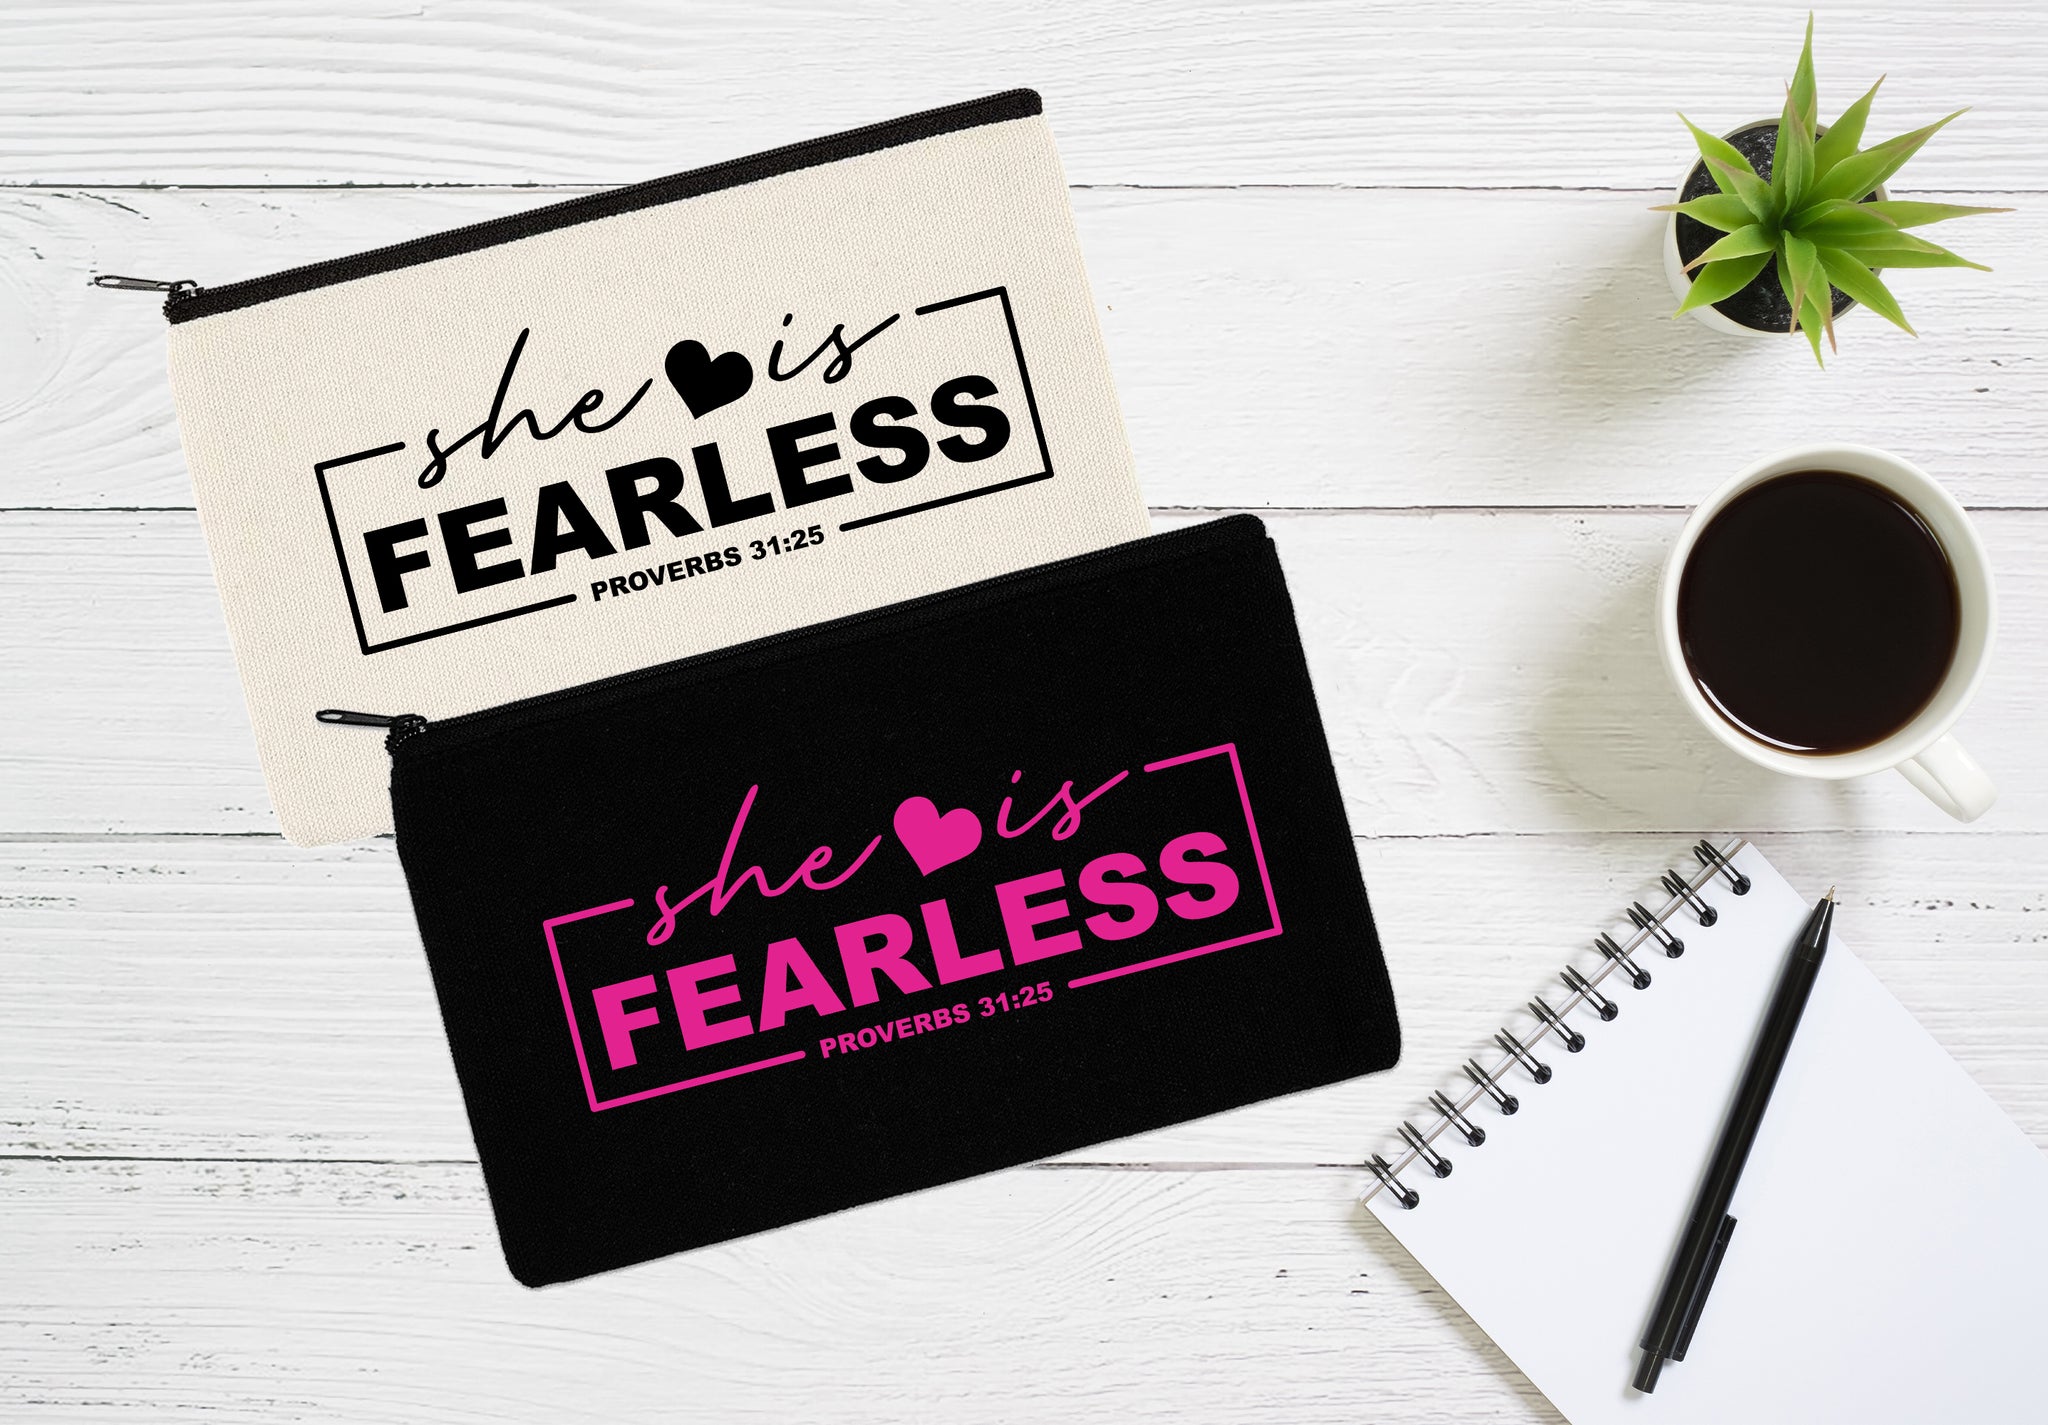 She is Fearless Canvas Pouch